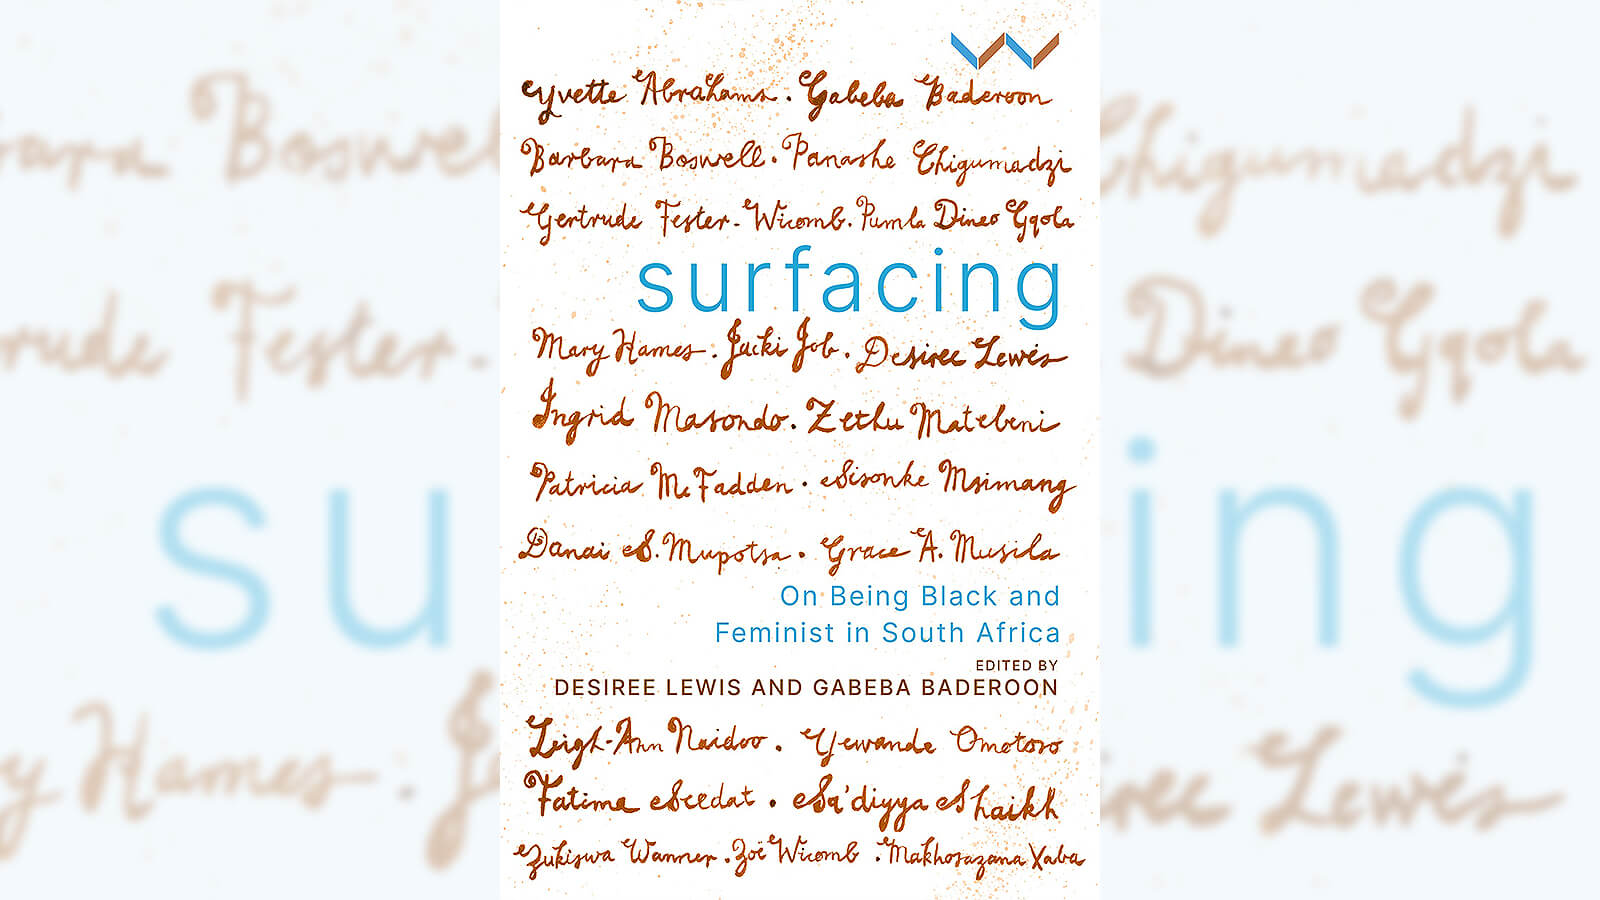 The book cover of Surfacing: On Being Black And Feminist In South Africa